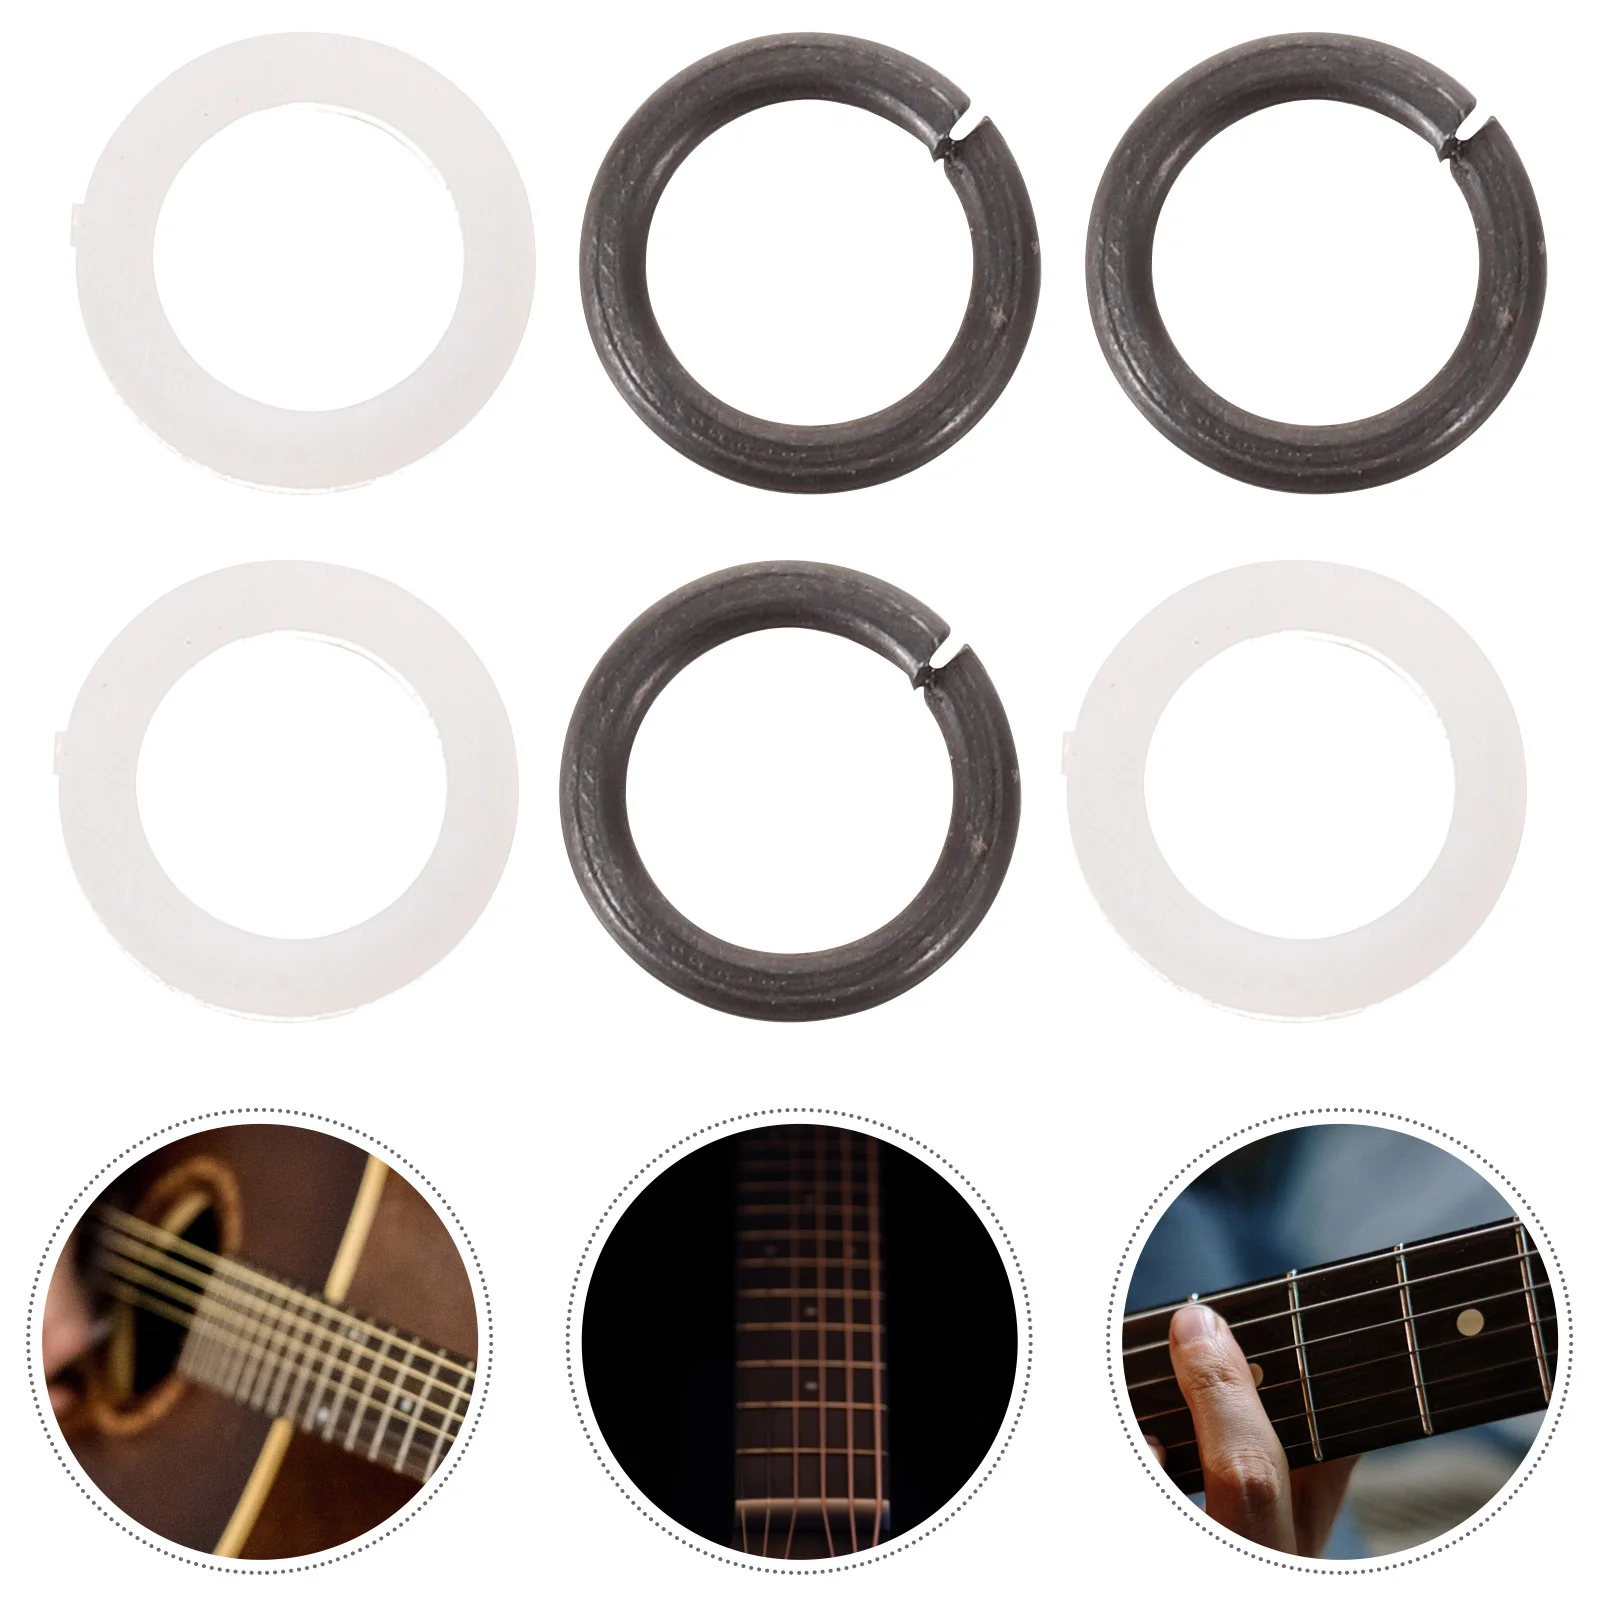 

10 Pairs Guitar Peg Spacer Electric Parts Tuner Spacers Washer Accessories Portable Tuning Gasket Metal Small